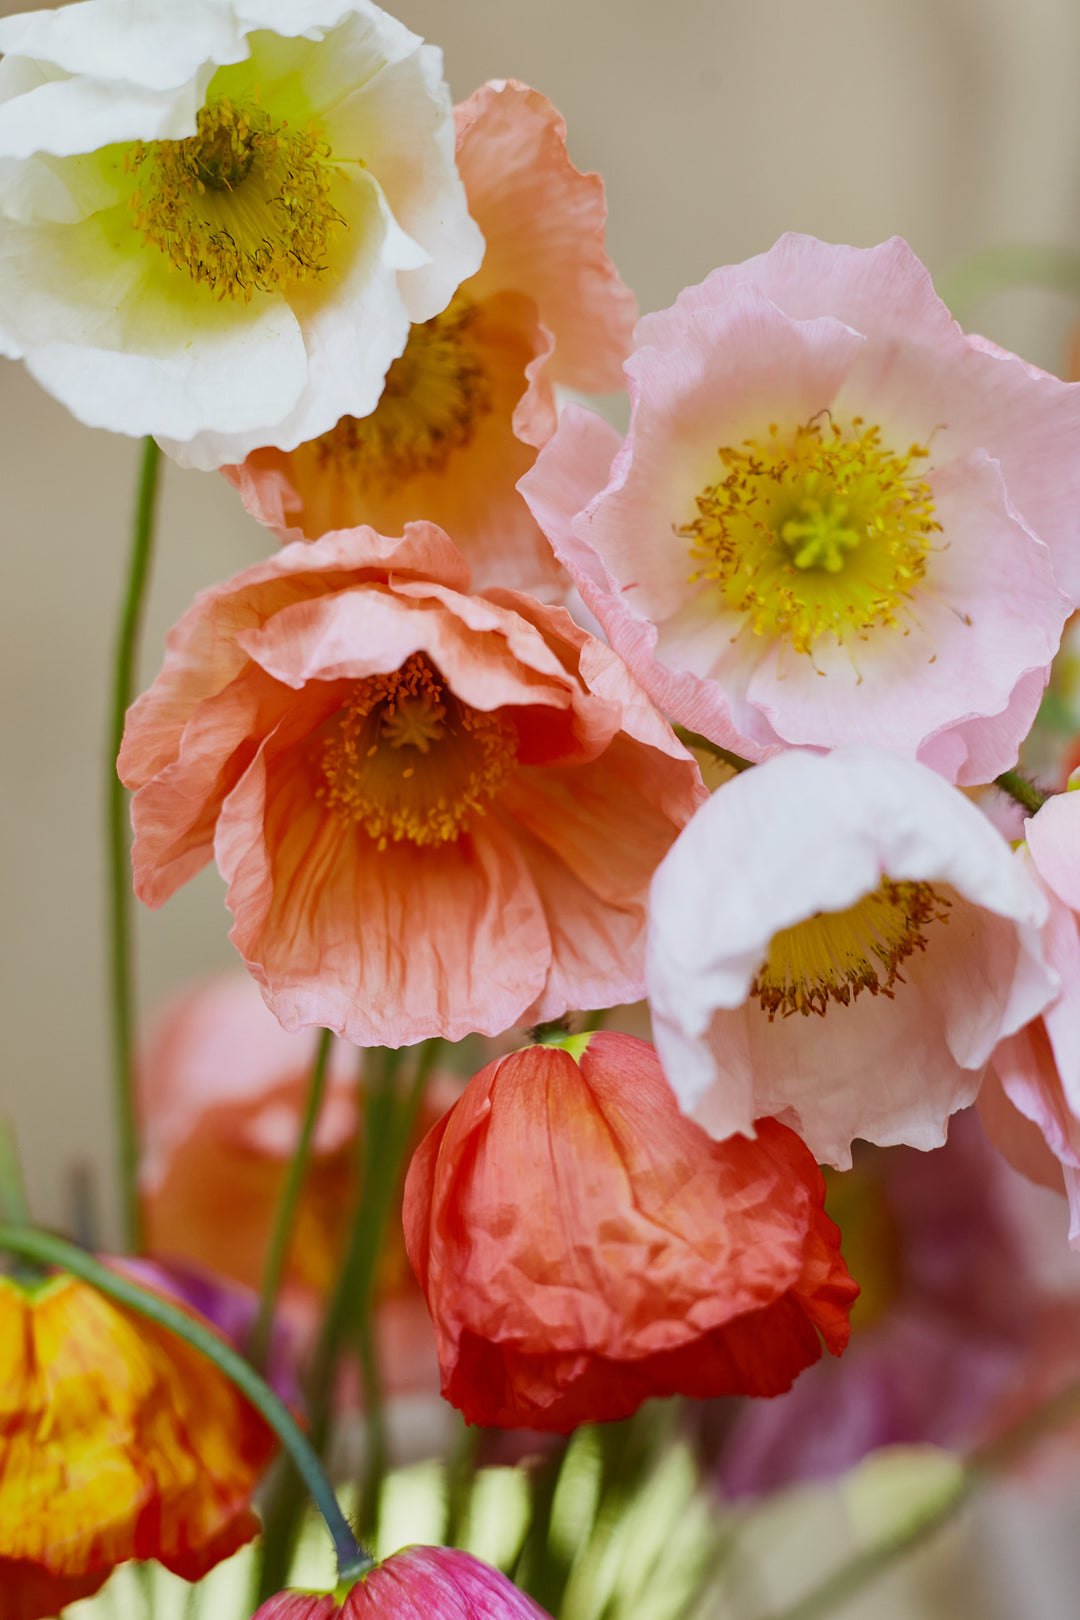 Poppy Iceland Pastel Victory Giant Mixed Flower | x 300-500 seeds